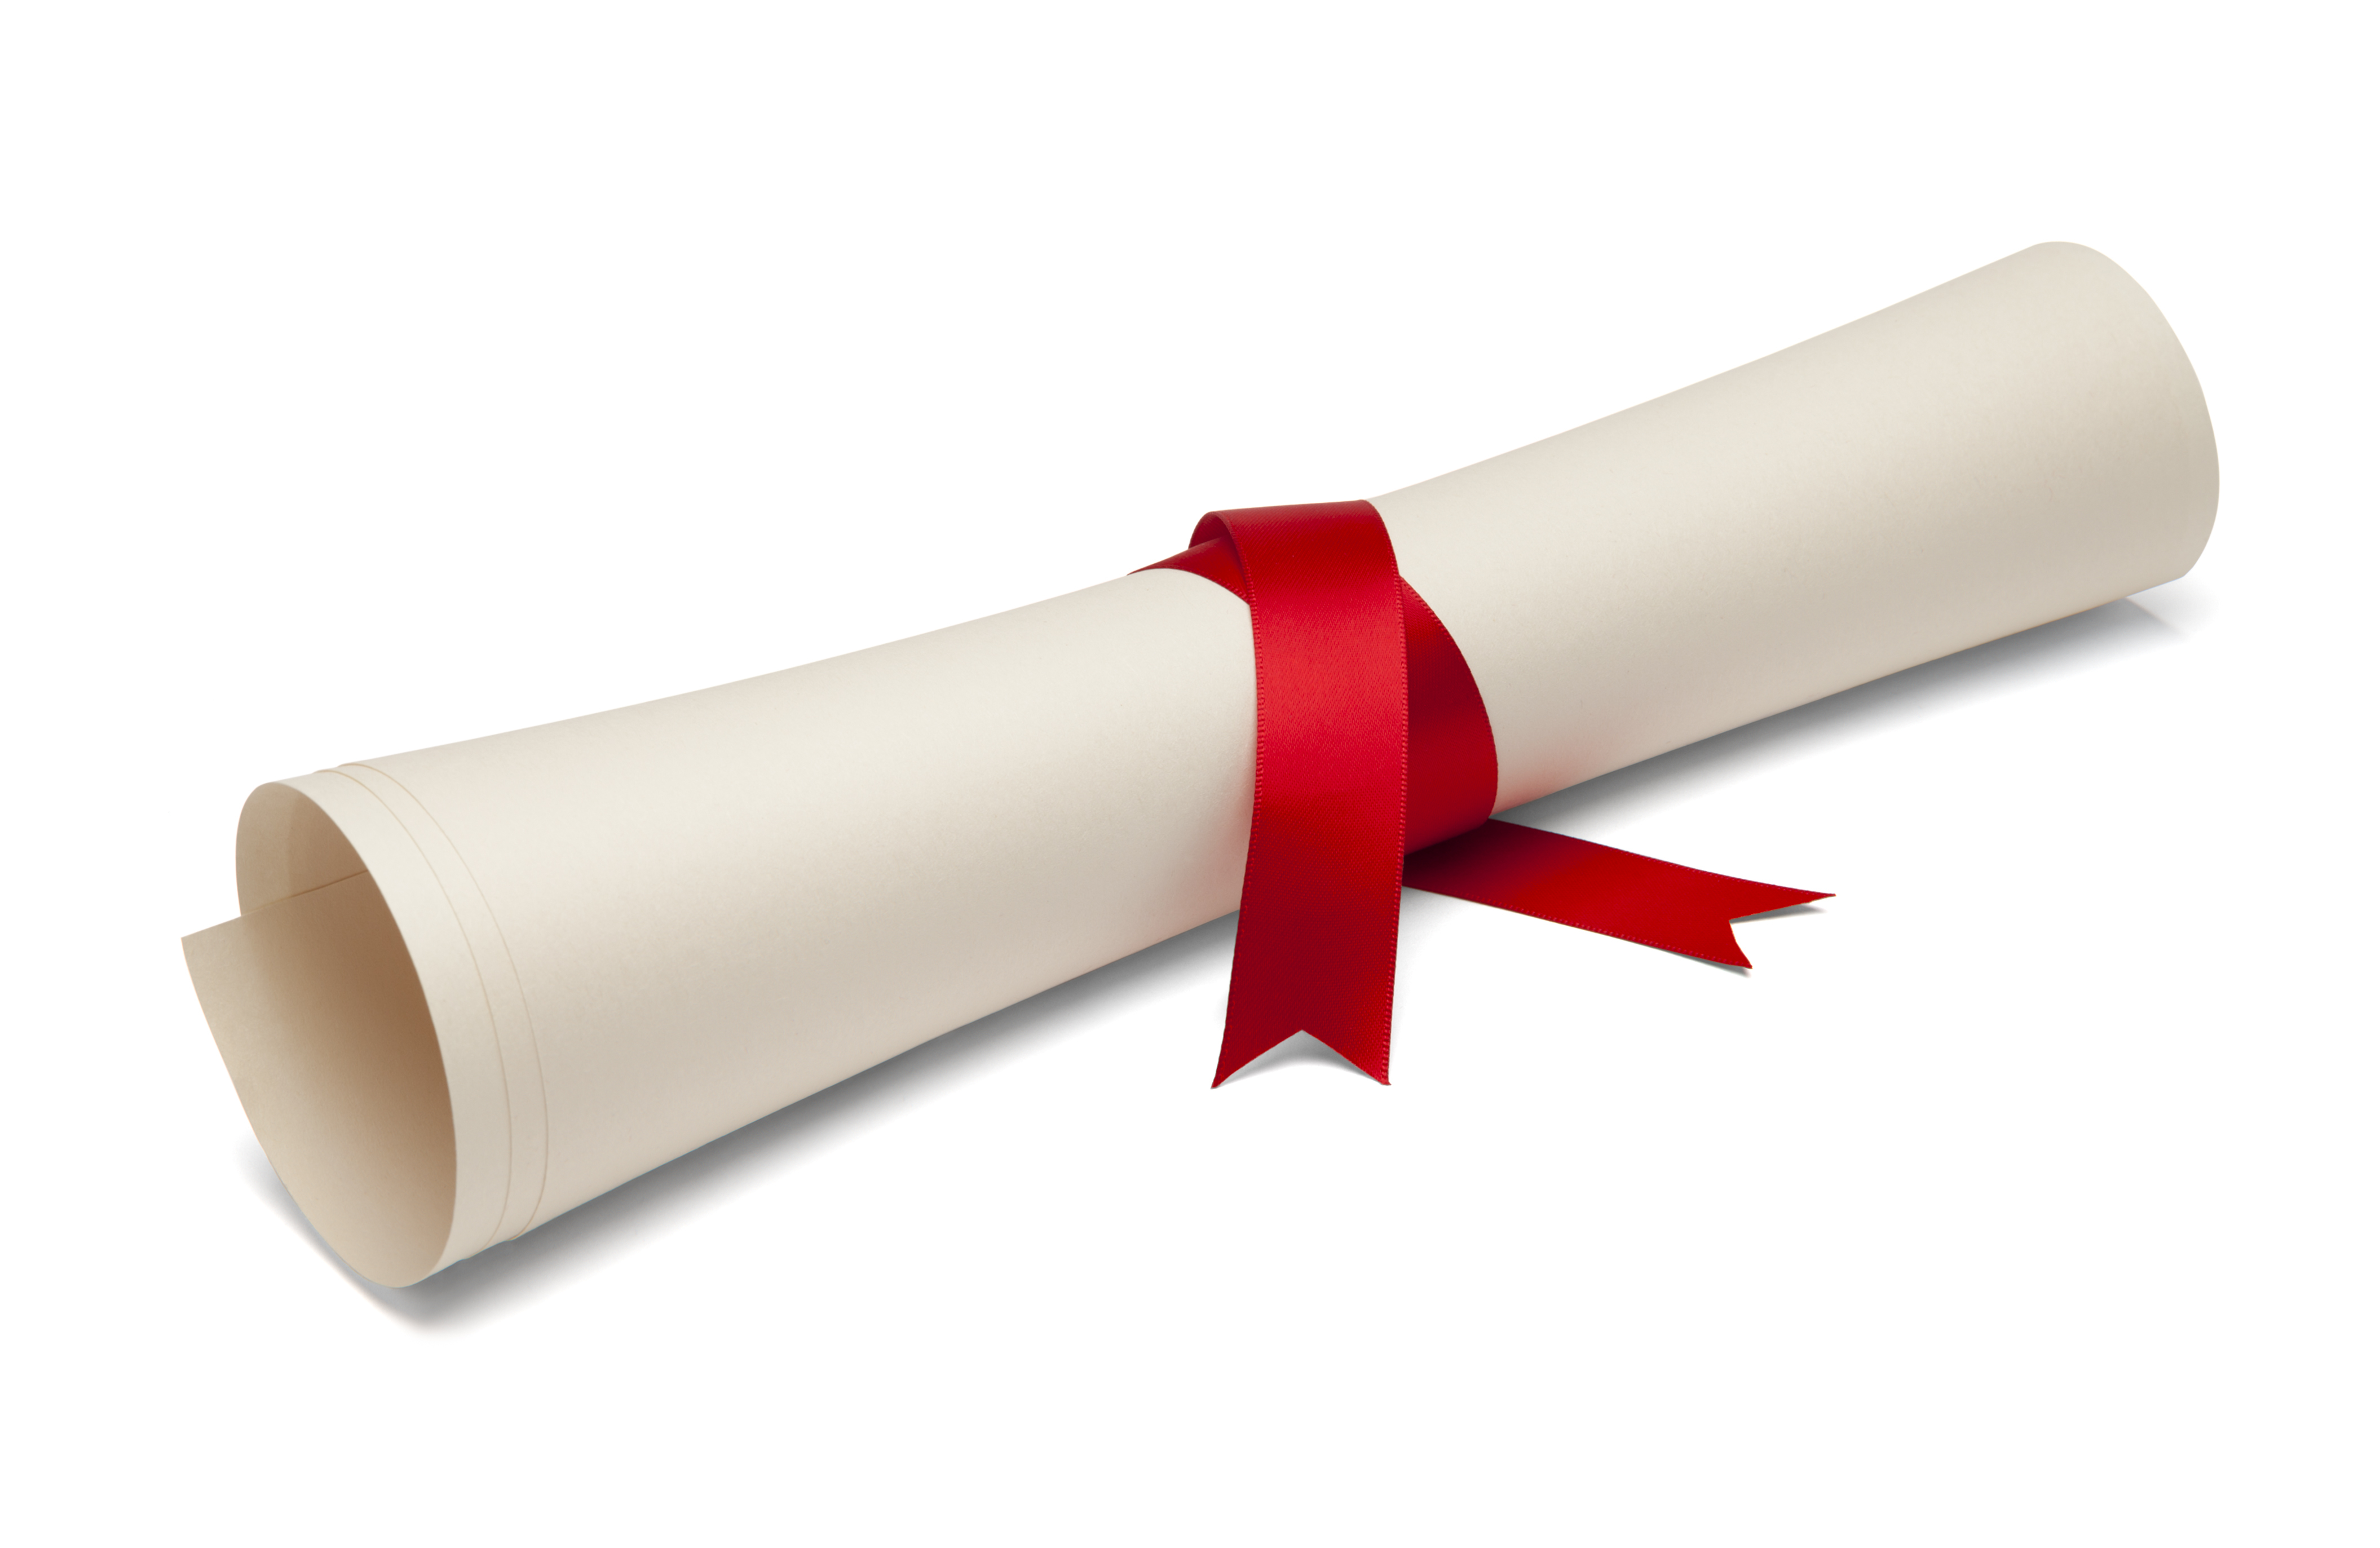 Scroll certificate cliparts zone. Diploma clipart rolled up